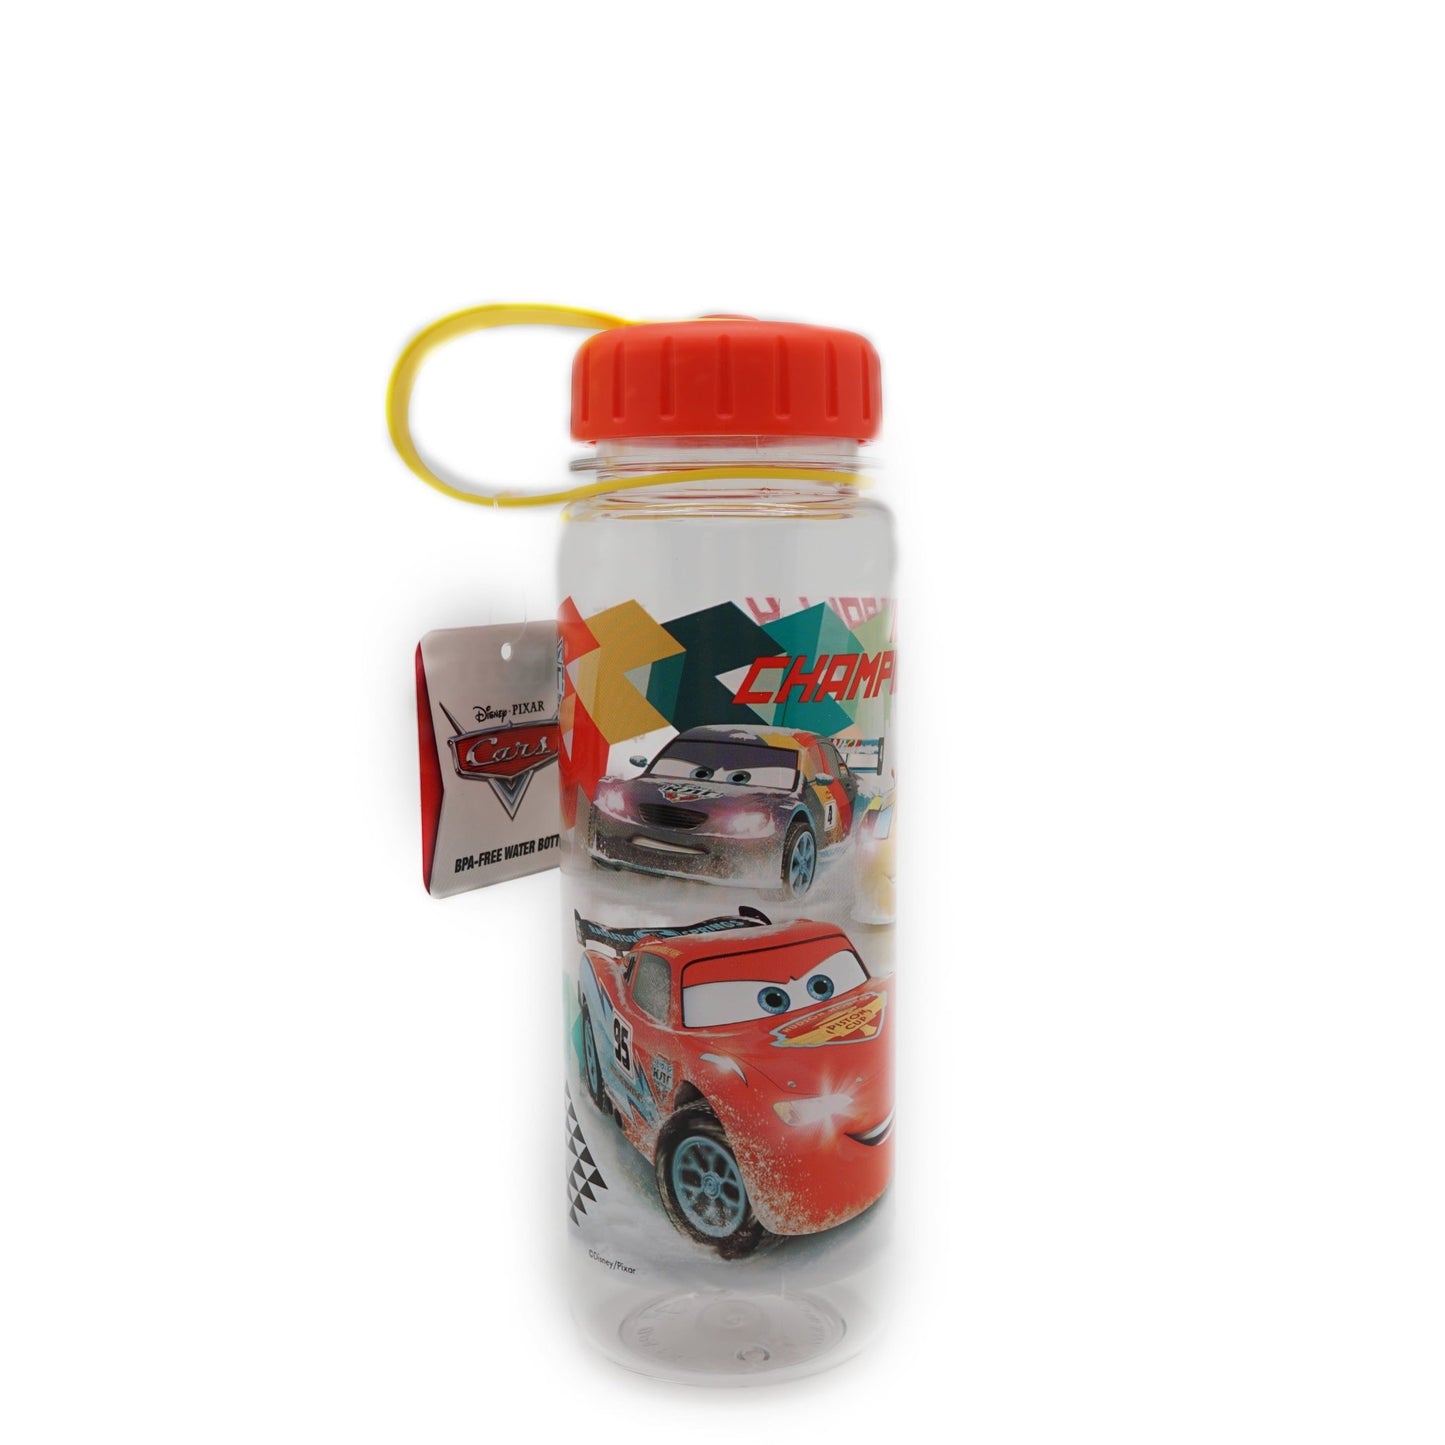 Disney Cars - 450ml (BPA Free) - "Ice Rally Championships" (Different Cap Options)